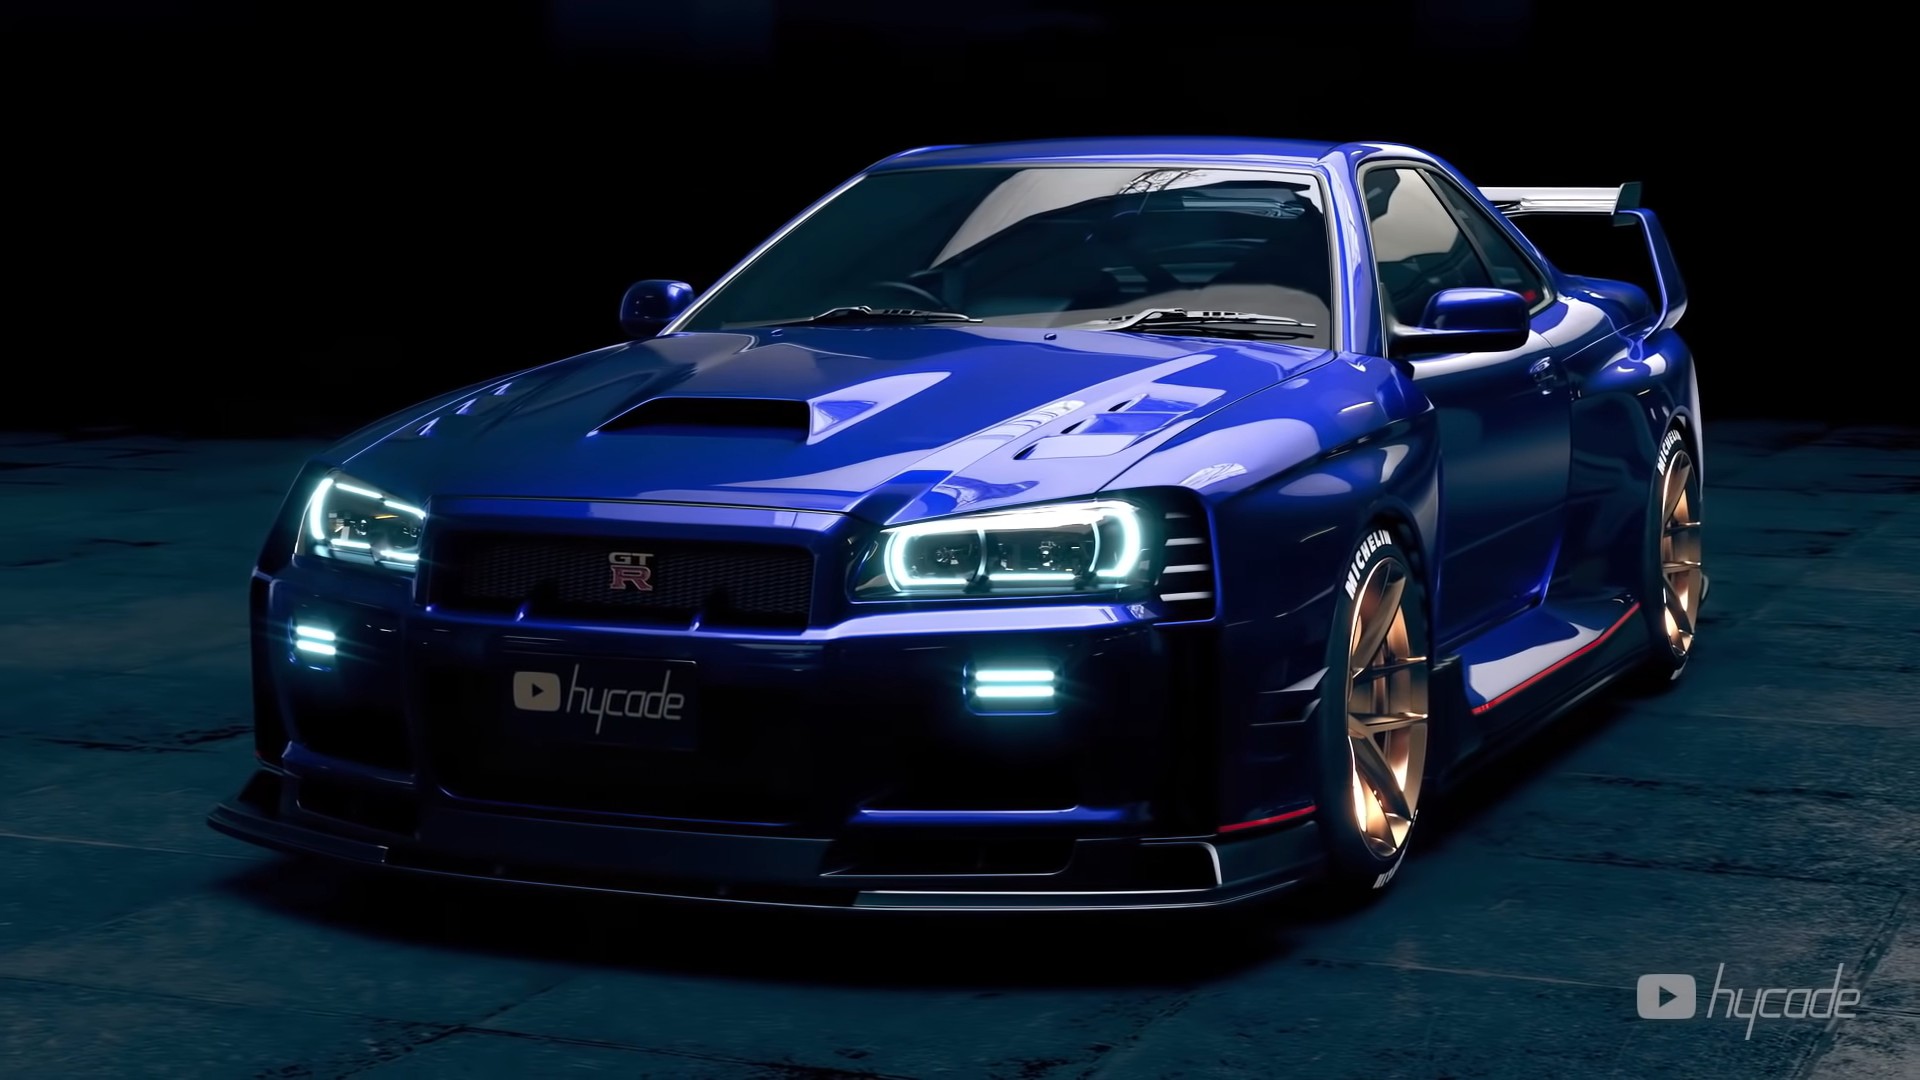 R34 Nissan Gt R Looks Like A Nismo Supercar In Glossy Widebody Rendering Autoevolution